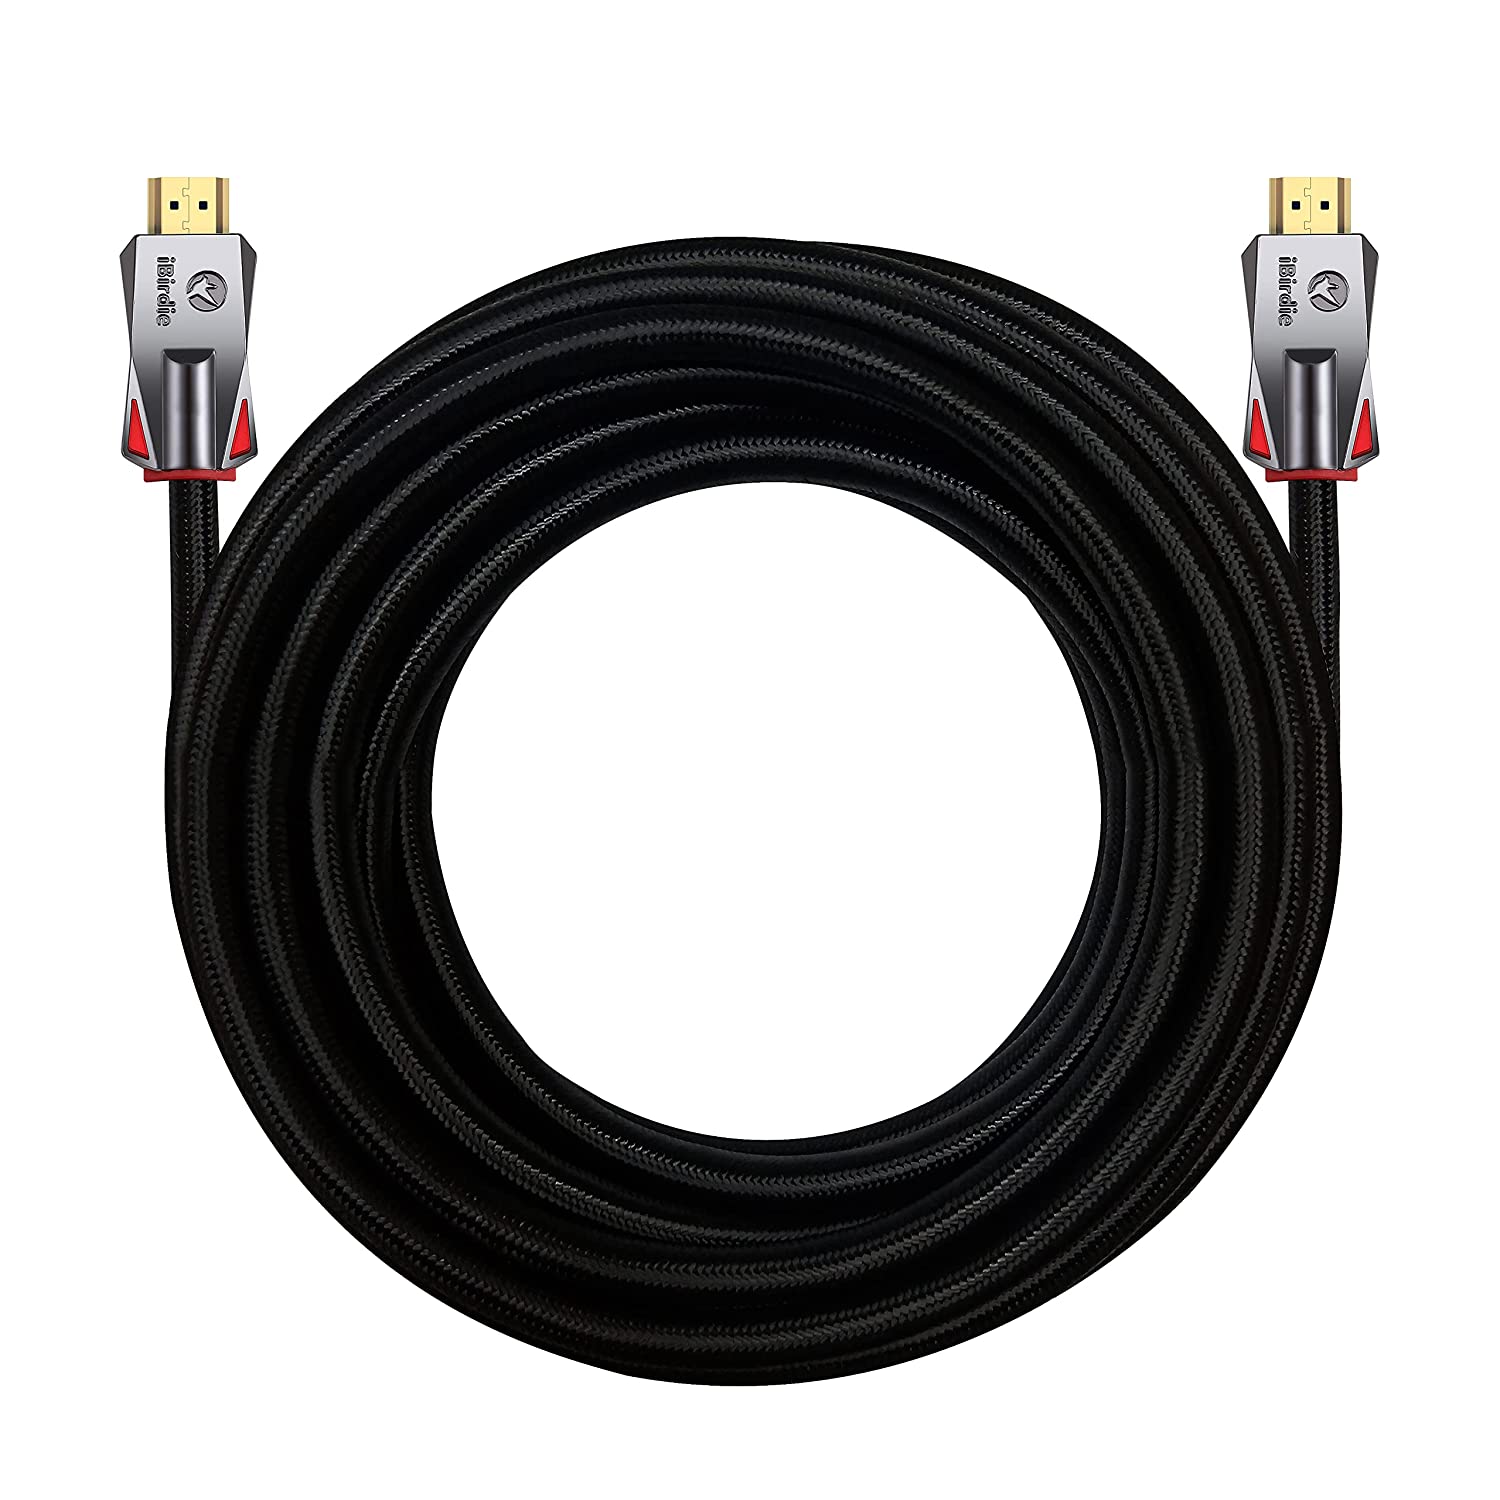 8K HDMI 2.1 Cable 8K60hz 4K 120hz 144hz HDCP 2.3 2.2 eARC ARC 48Gbps Ultra High Speed Compatible with Dolby Vision Atmos PS5 PS4, Xbox One Series X,